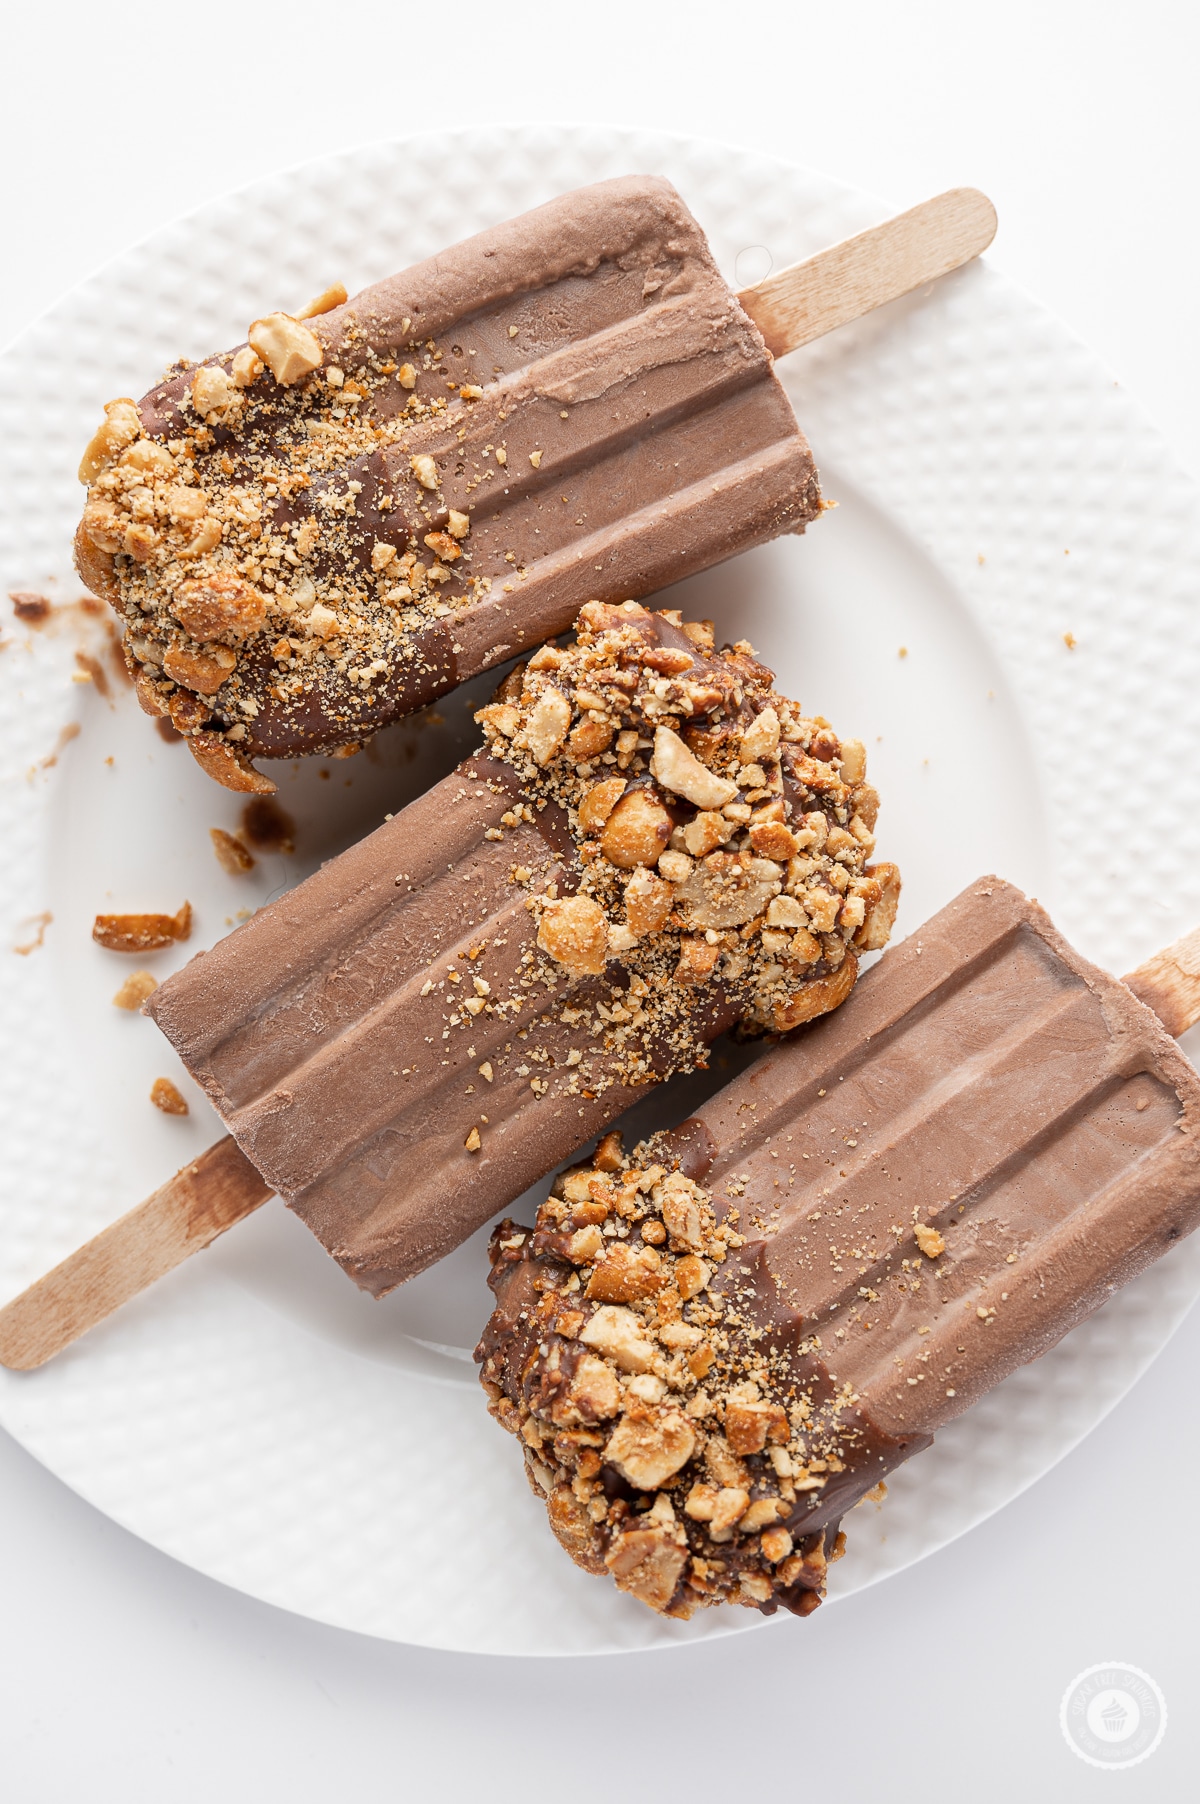 Sugar free fudgesicle with tops coated in milk chocolate and crushed peanuts on a bright white background 